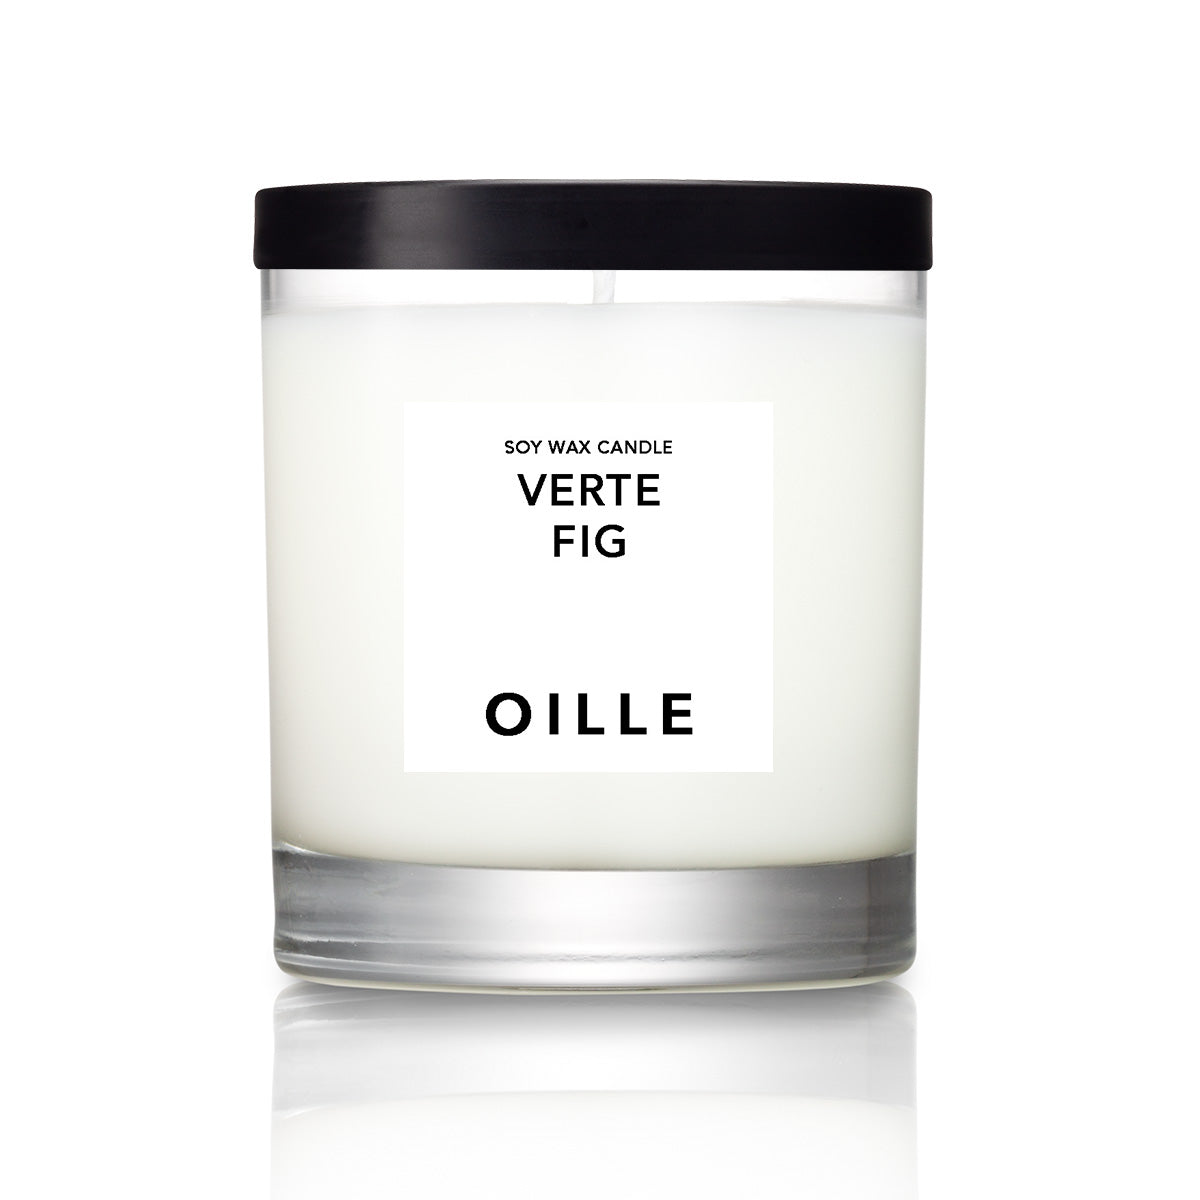 VERTE FIG SOY CANDLE